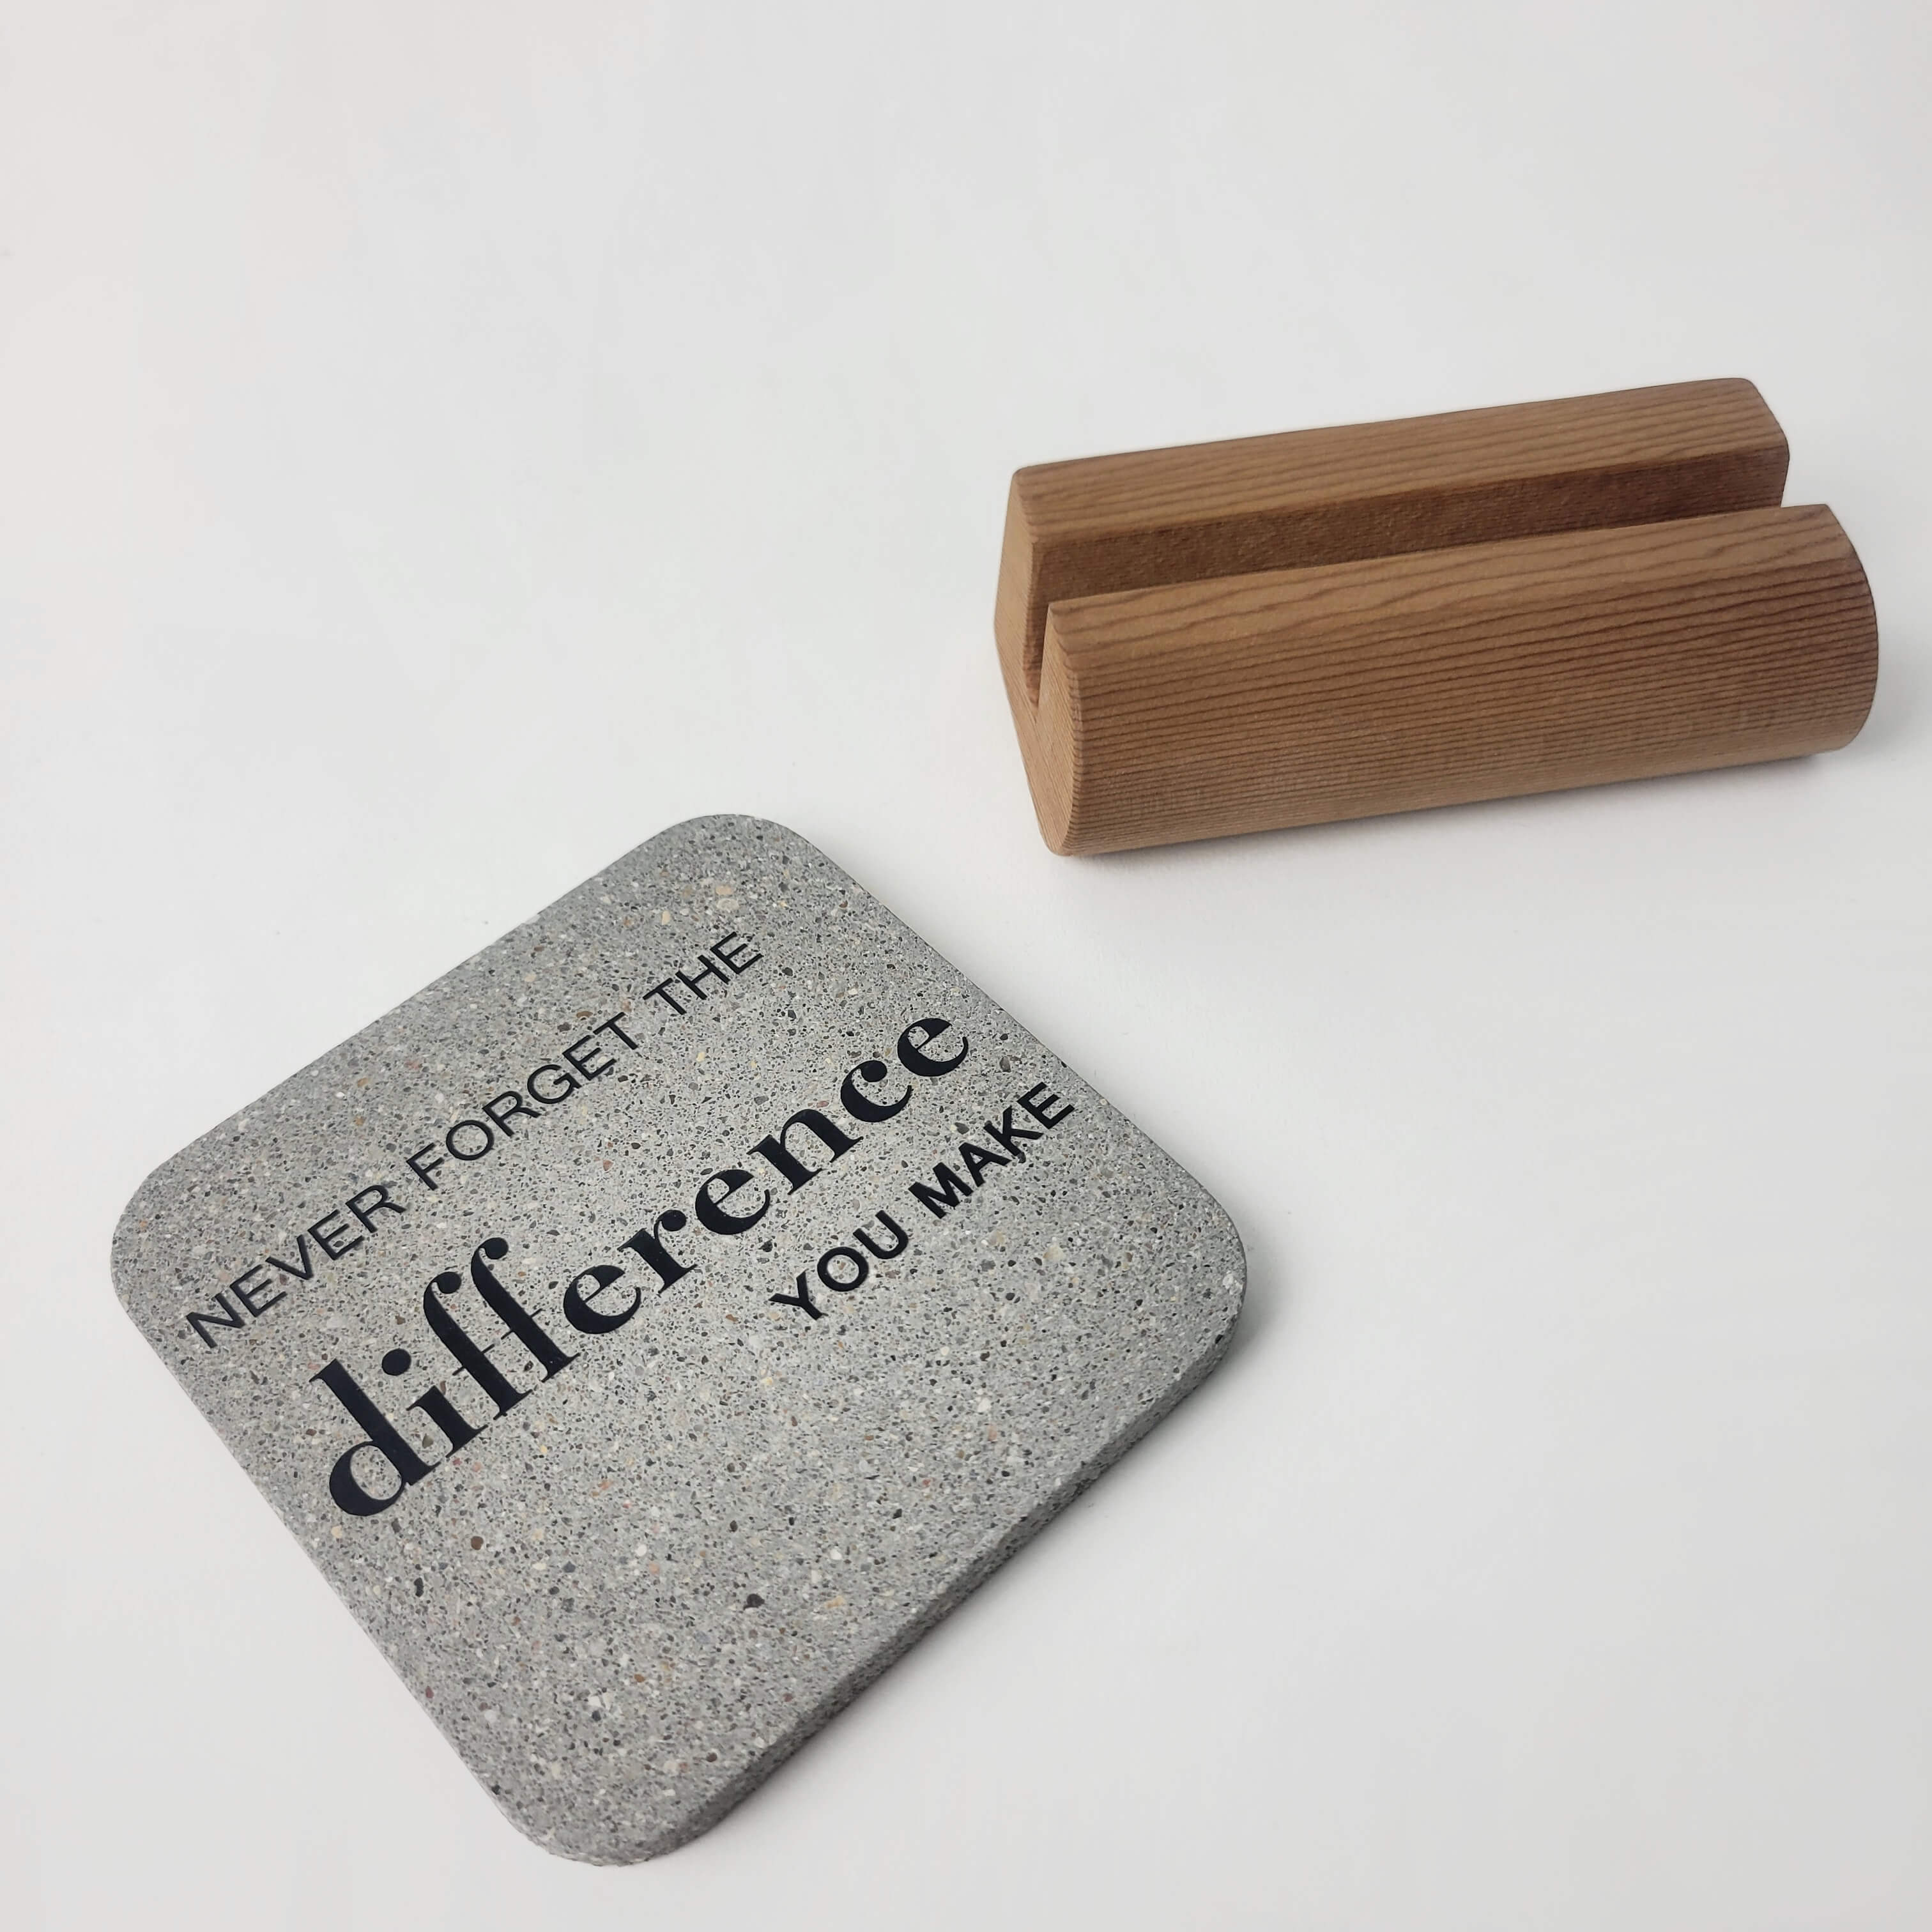 Grey stone motivational mini display 'The difference you make'  lying flat in the foreground with notched upcycled western red-cedar base in the background for office and home decor.